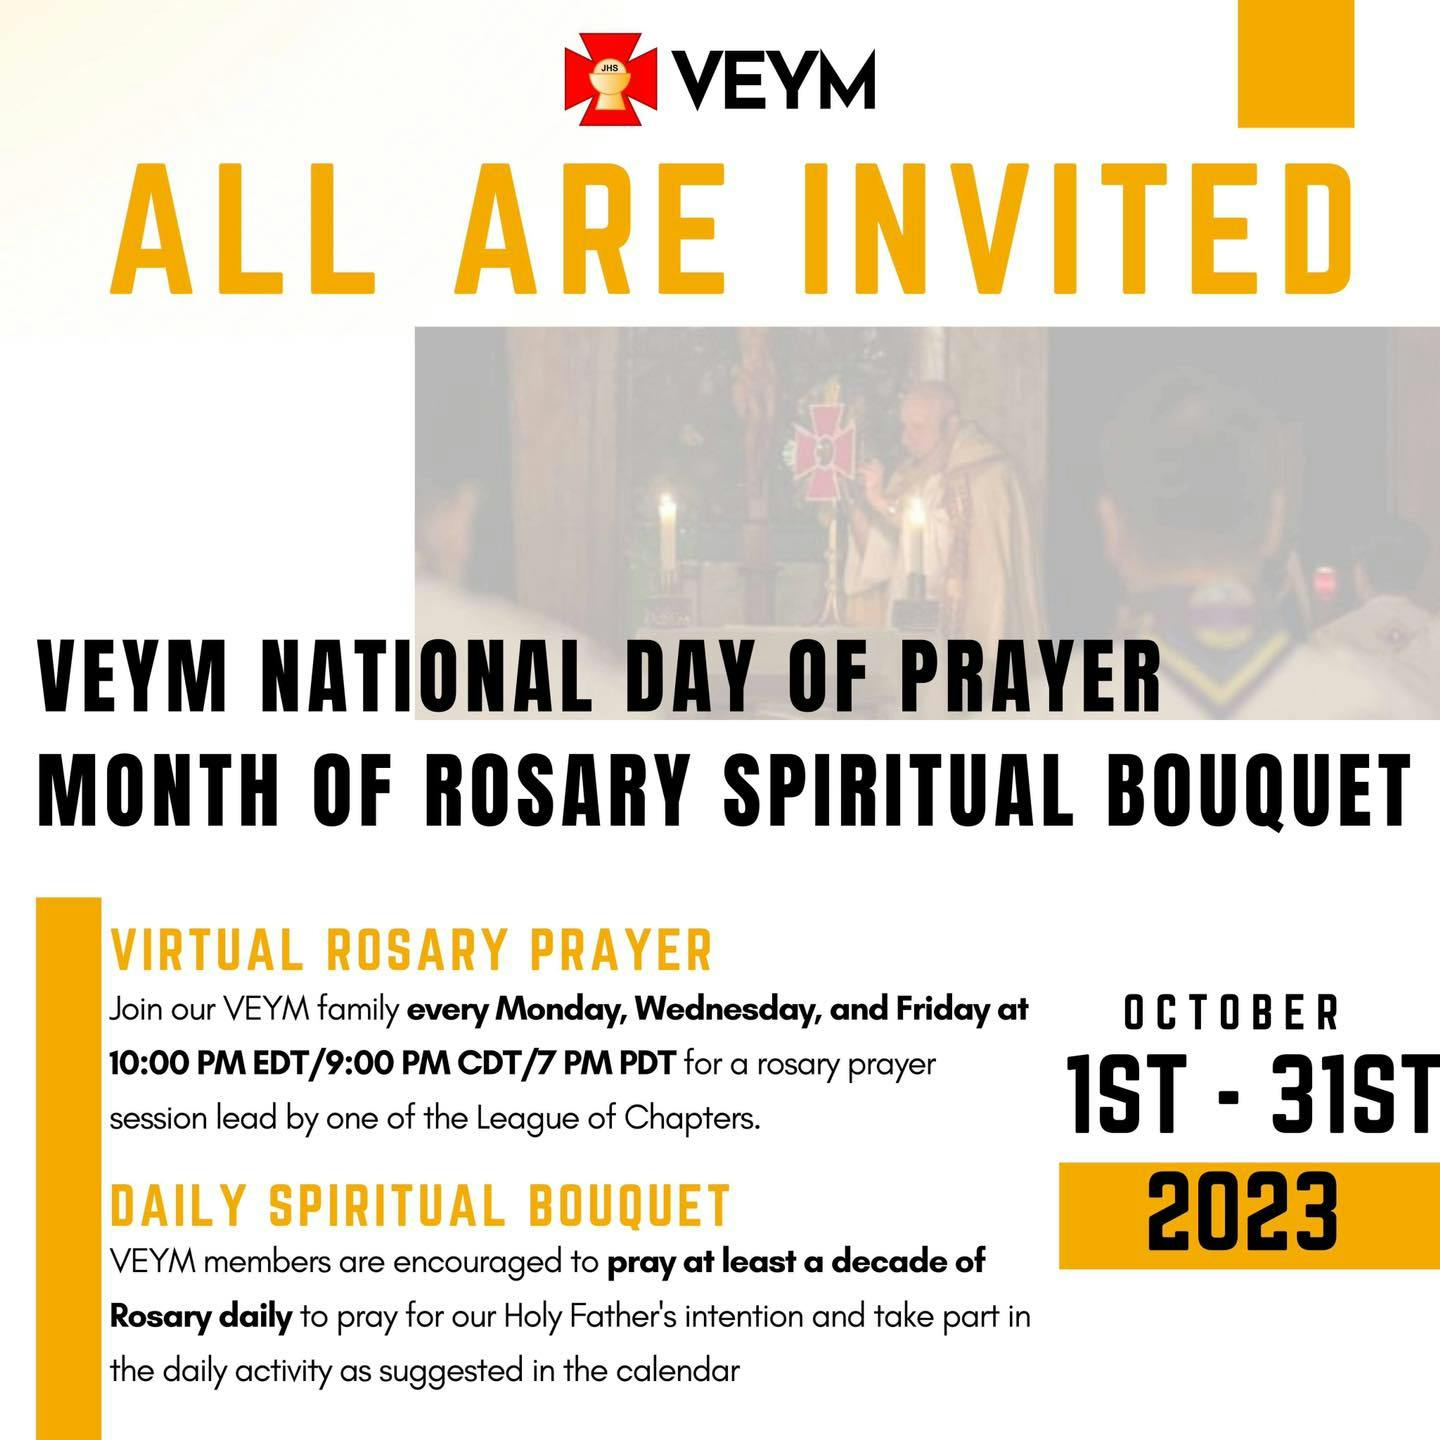 Celebrating the VEYM National Day of Prayer with the 2023 Spiritual Bouquet Campaign for Rosary Month and the Holy-Ween Costume Contest